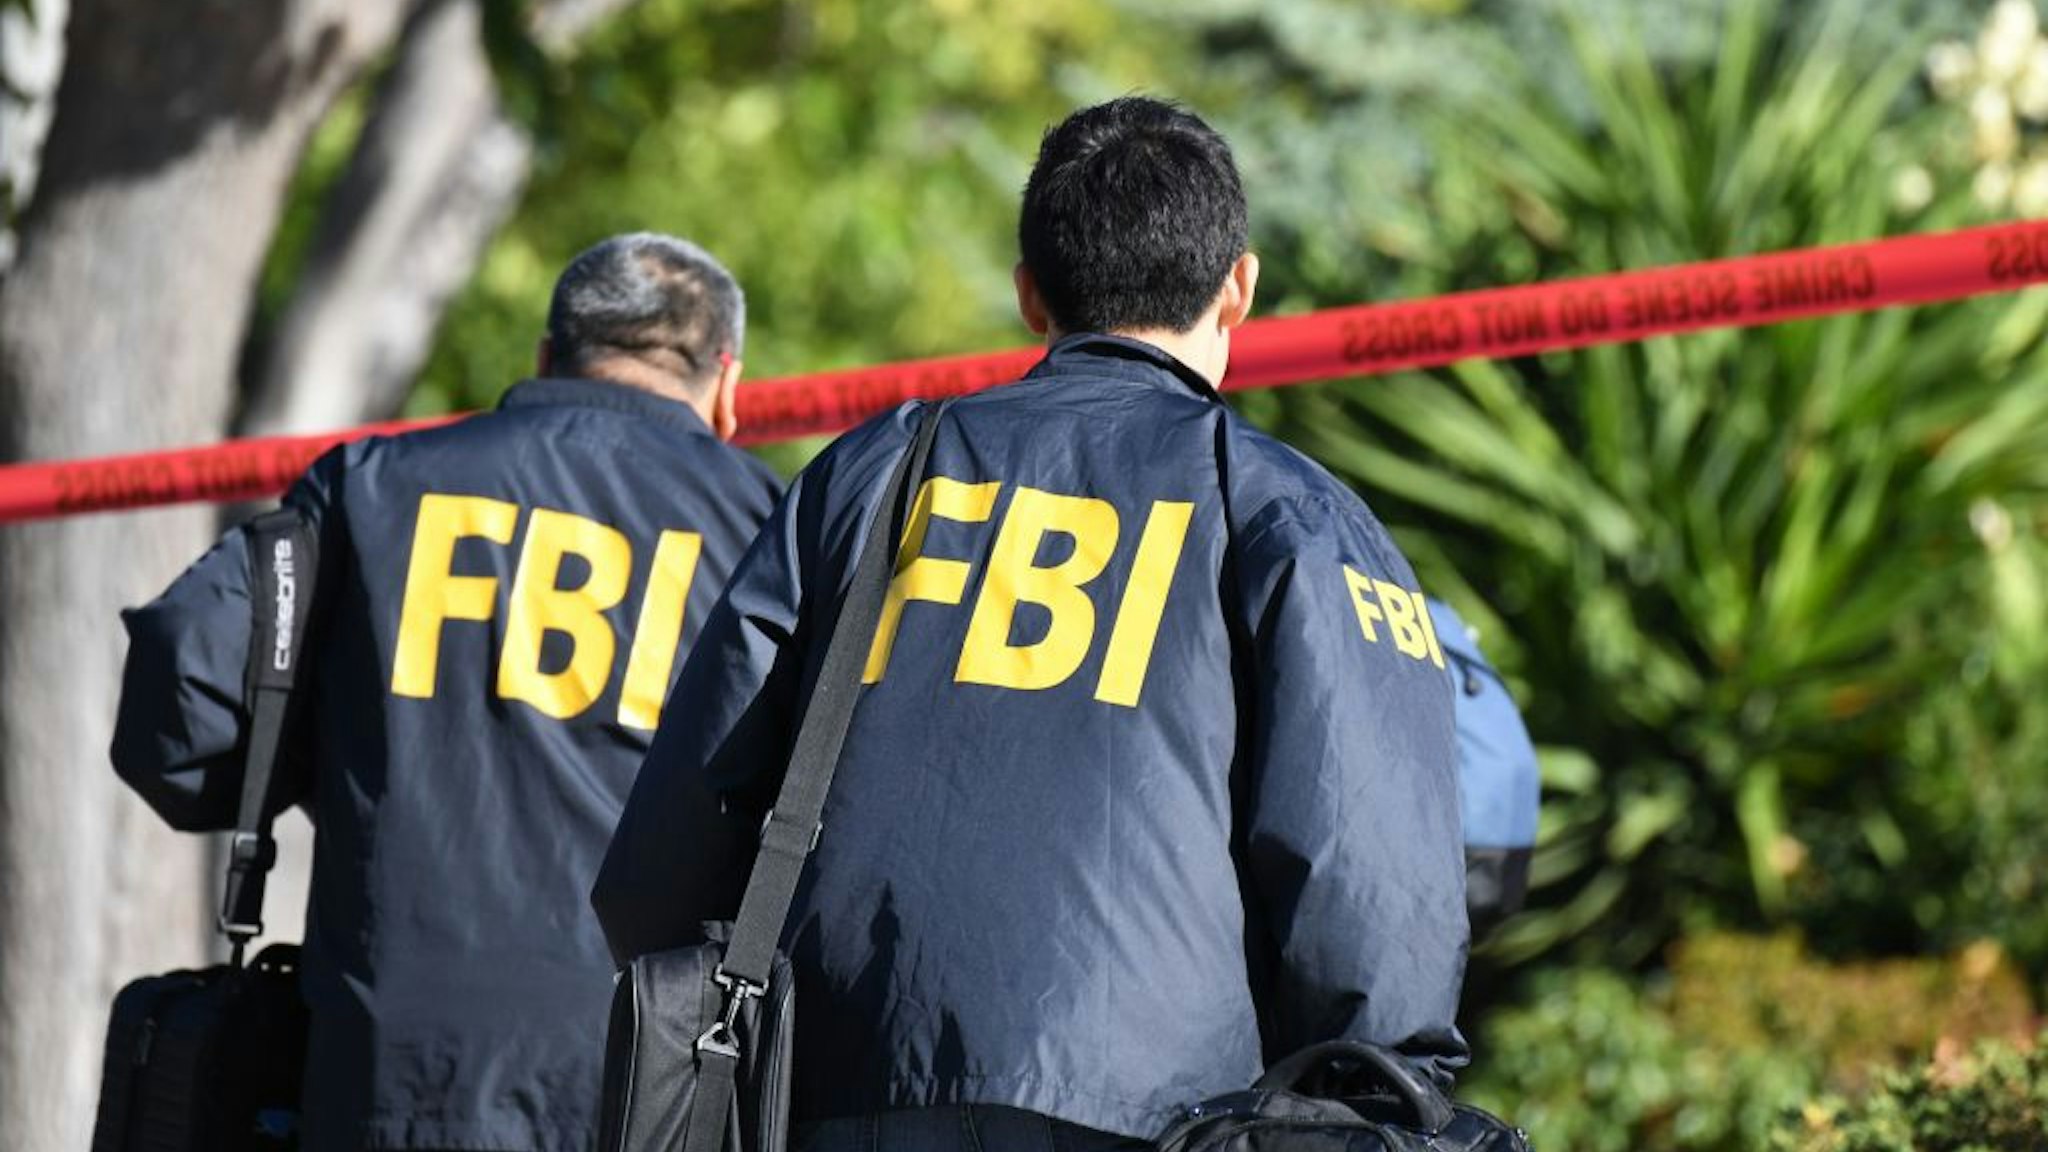 FBI investigators arrive at the home of suspected nightclub shooter Ian David Long on November 8 2018, in Thousand Oaks, California. - The gunman who killed 12 people in a crowded California country music bar has been identified as 28-year-old Ian David Long, a former Marine, the local sheriff said Thursday. The suspect, who was armed with a .45-caliber handgun, was found deceased at the Borderline Bar and Grill, the scene of the shooting in the city of Thousand Oaks northwest of downtown Los Angeles. (Photo by Robyn Beck / AFP) (Photo by ROBYN BECK/AFP via Getty Images)